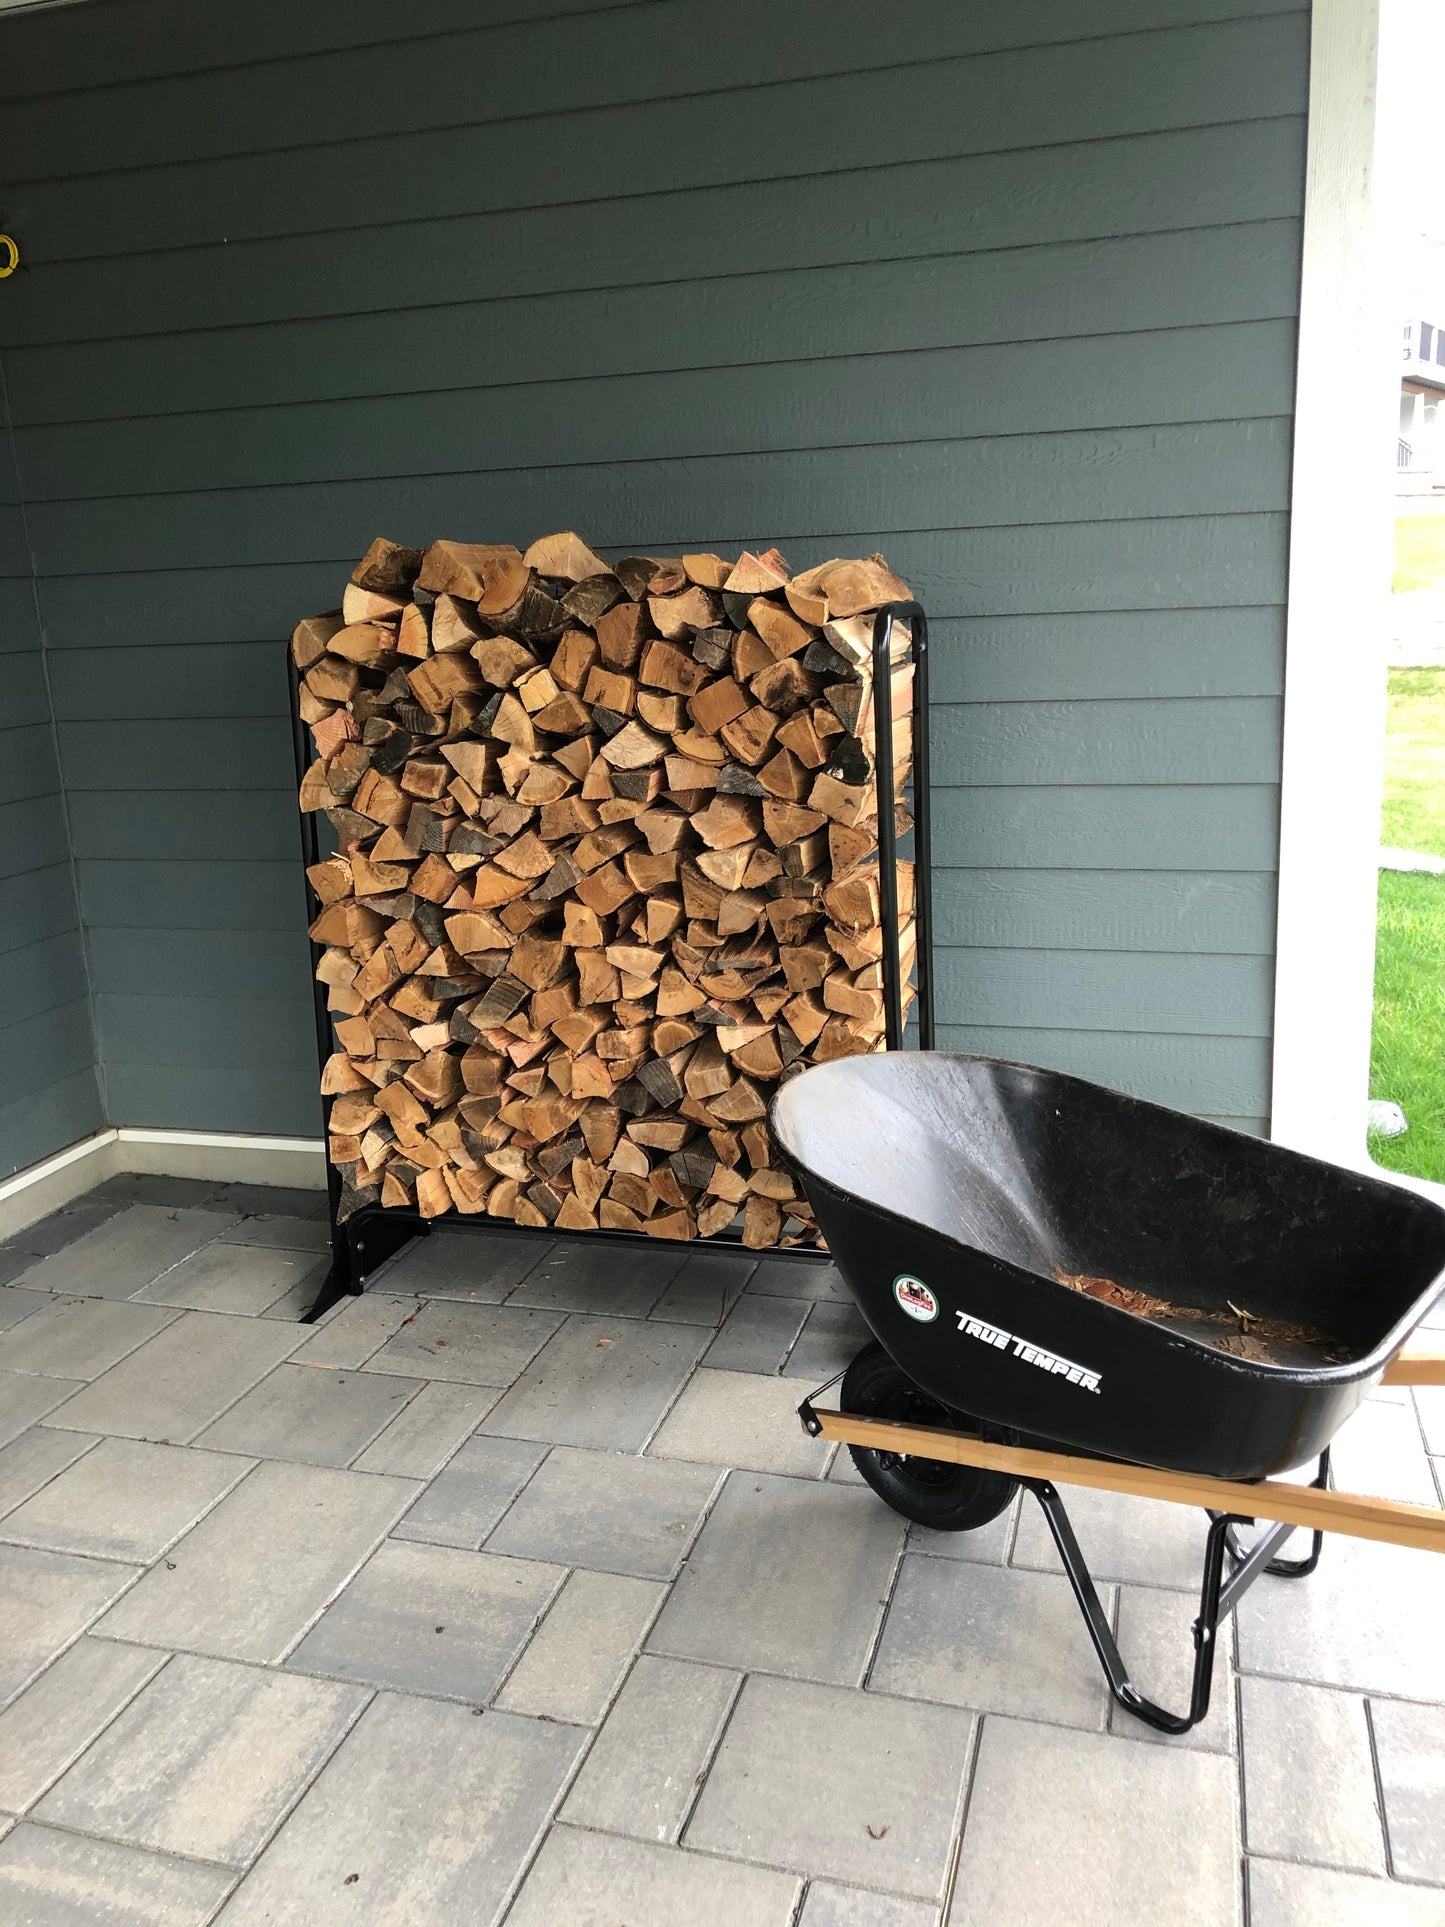 Bulk Firewood, Local Pickup Or Delivery with a Fee